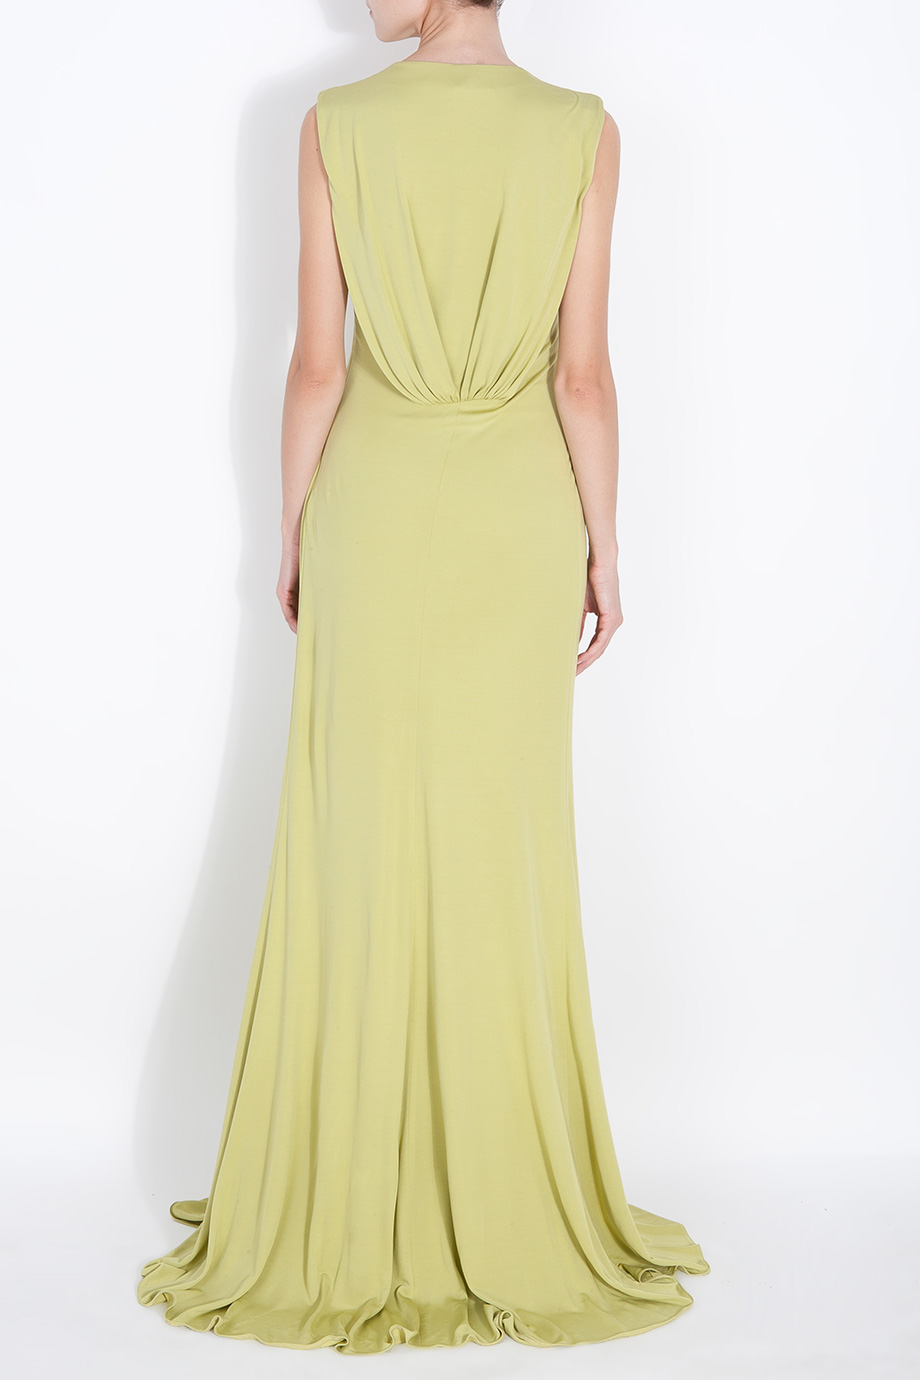 Elie Saab Ruched Det Jersey Dress in Yellow - Lyst